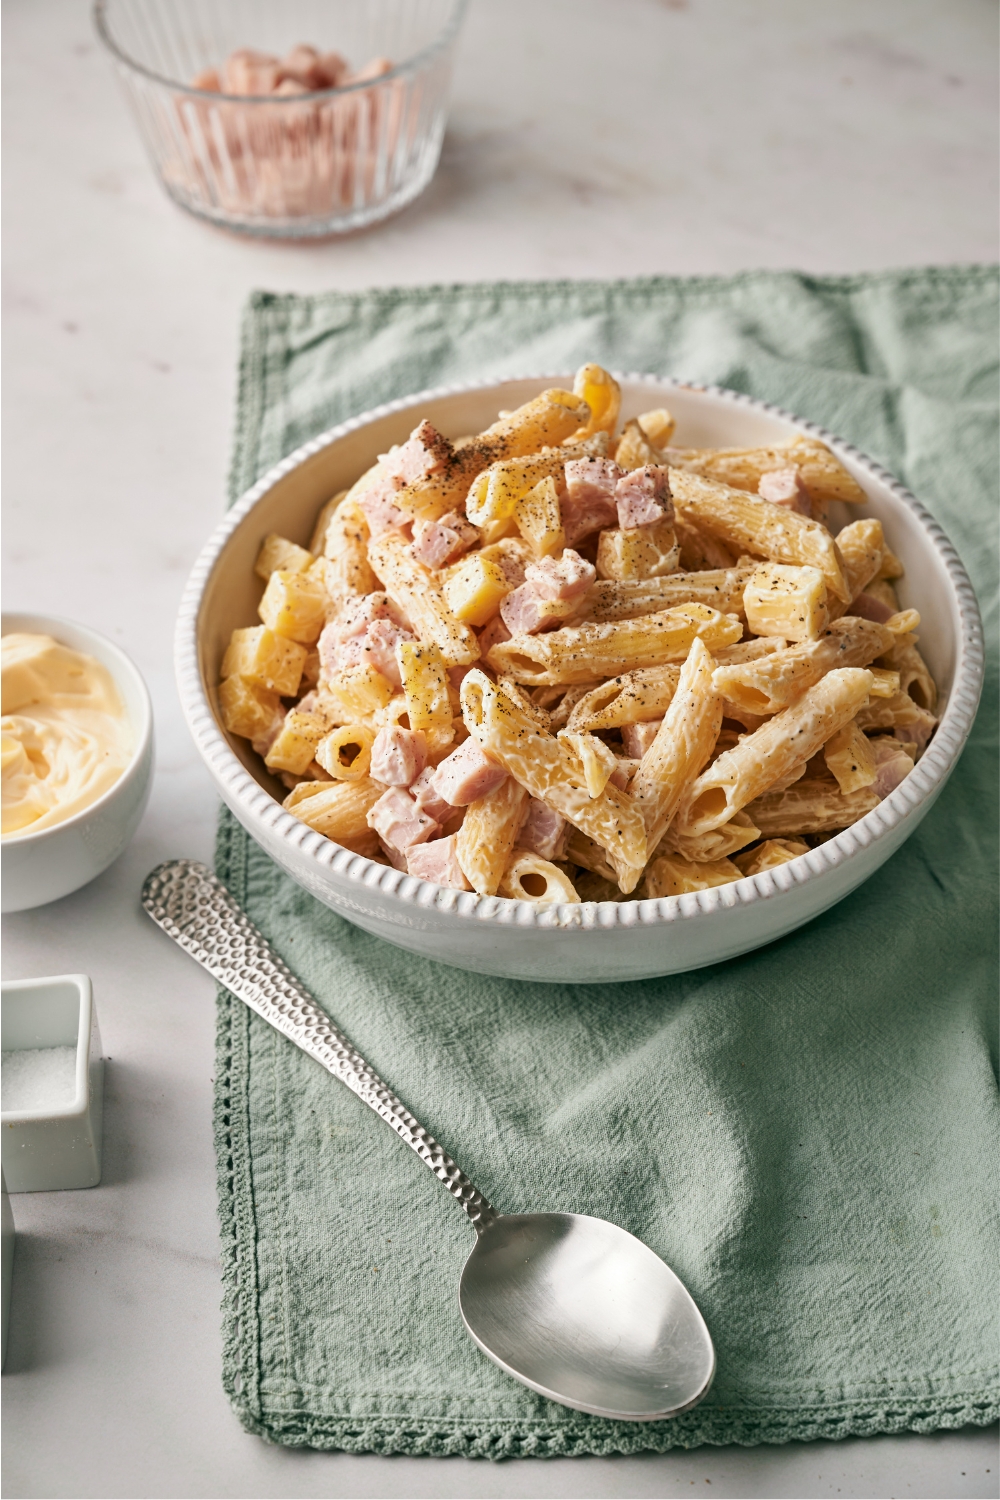 A white bowl of pasta salad with cubed ham, cubed cheese, and black pepper garnished on top, next to a spoon and smaller bowls of cubed ham and mayonnaise.